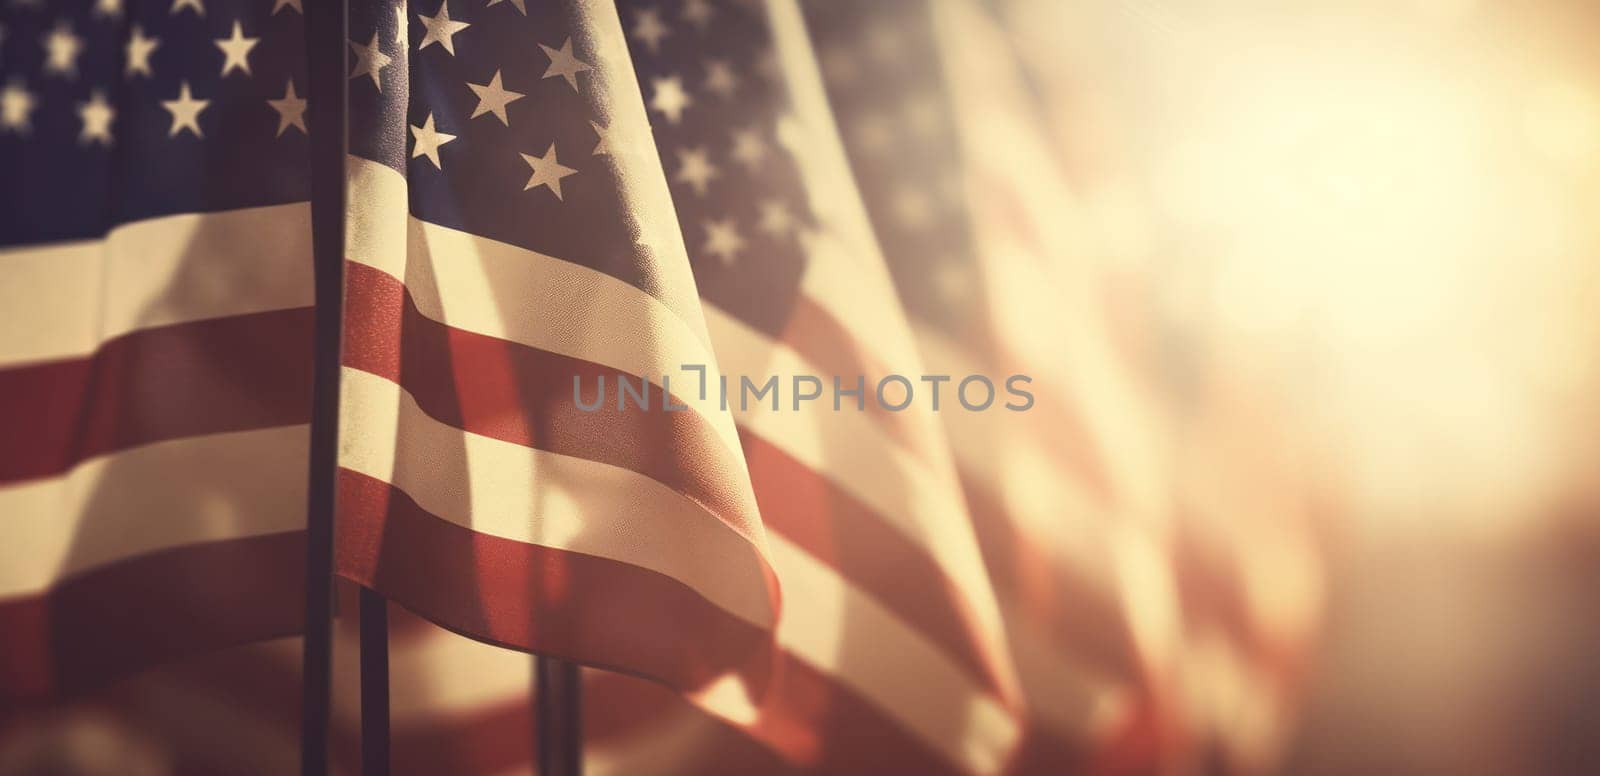 United Emblems of Freedom: A Closeup Photograph of the Patriotic American Flag Waving in the Sunlit Sky by Vichizh